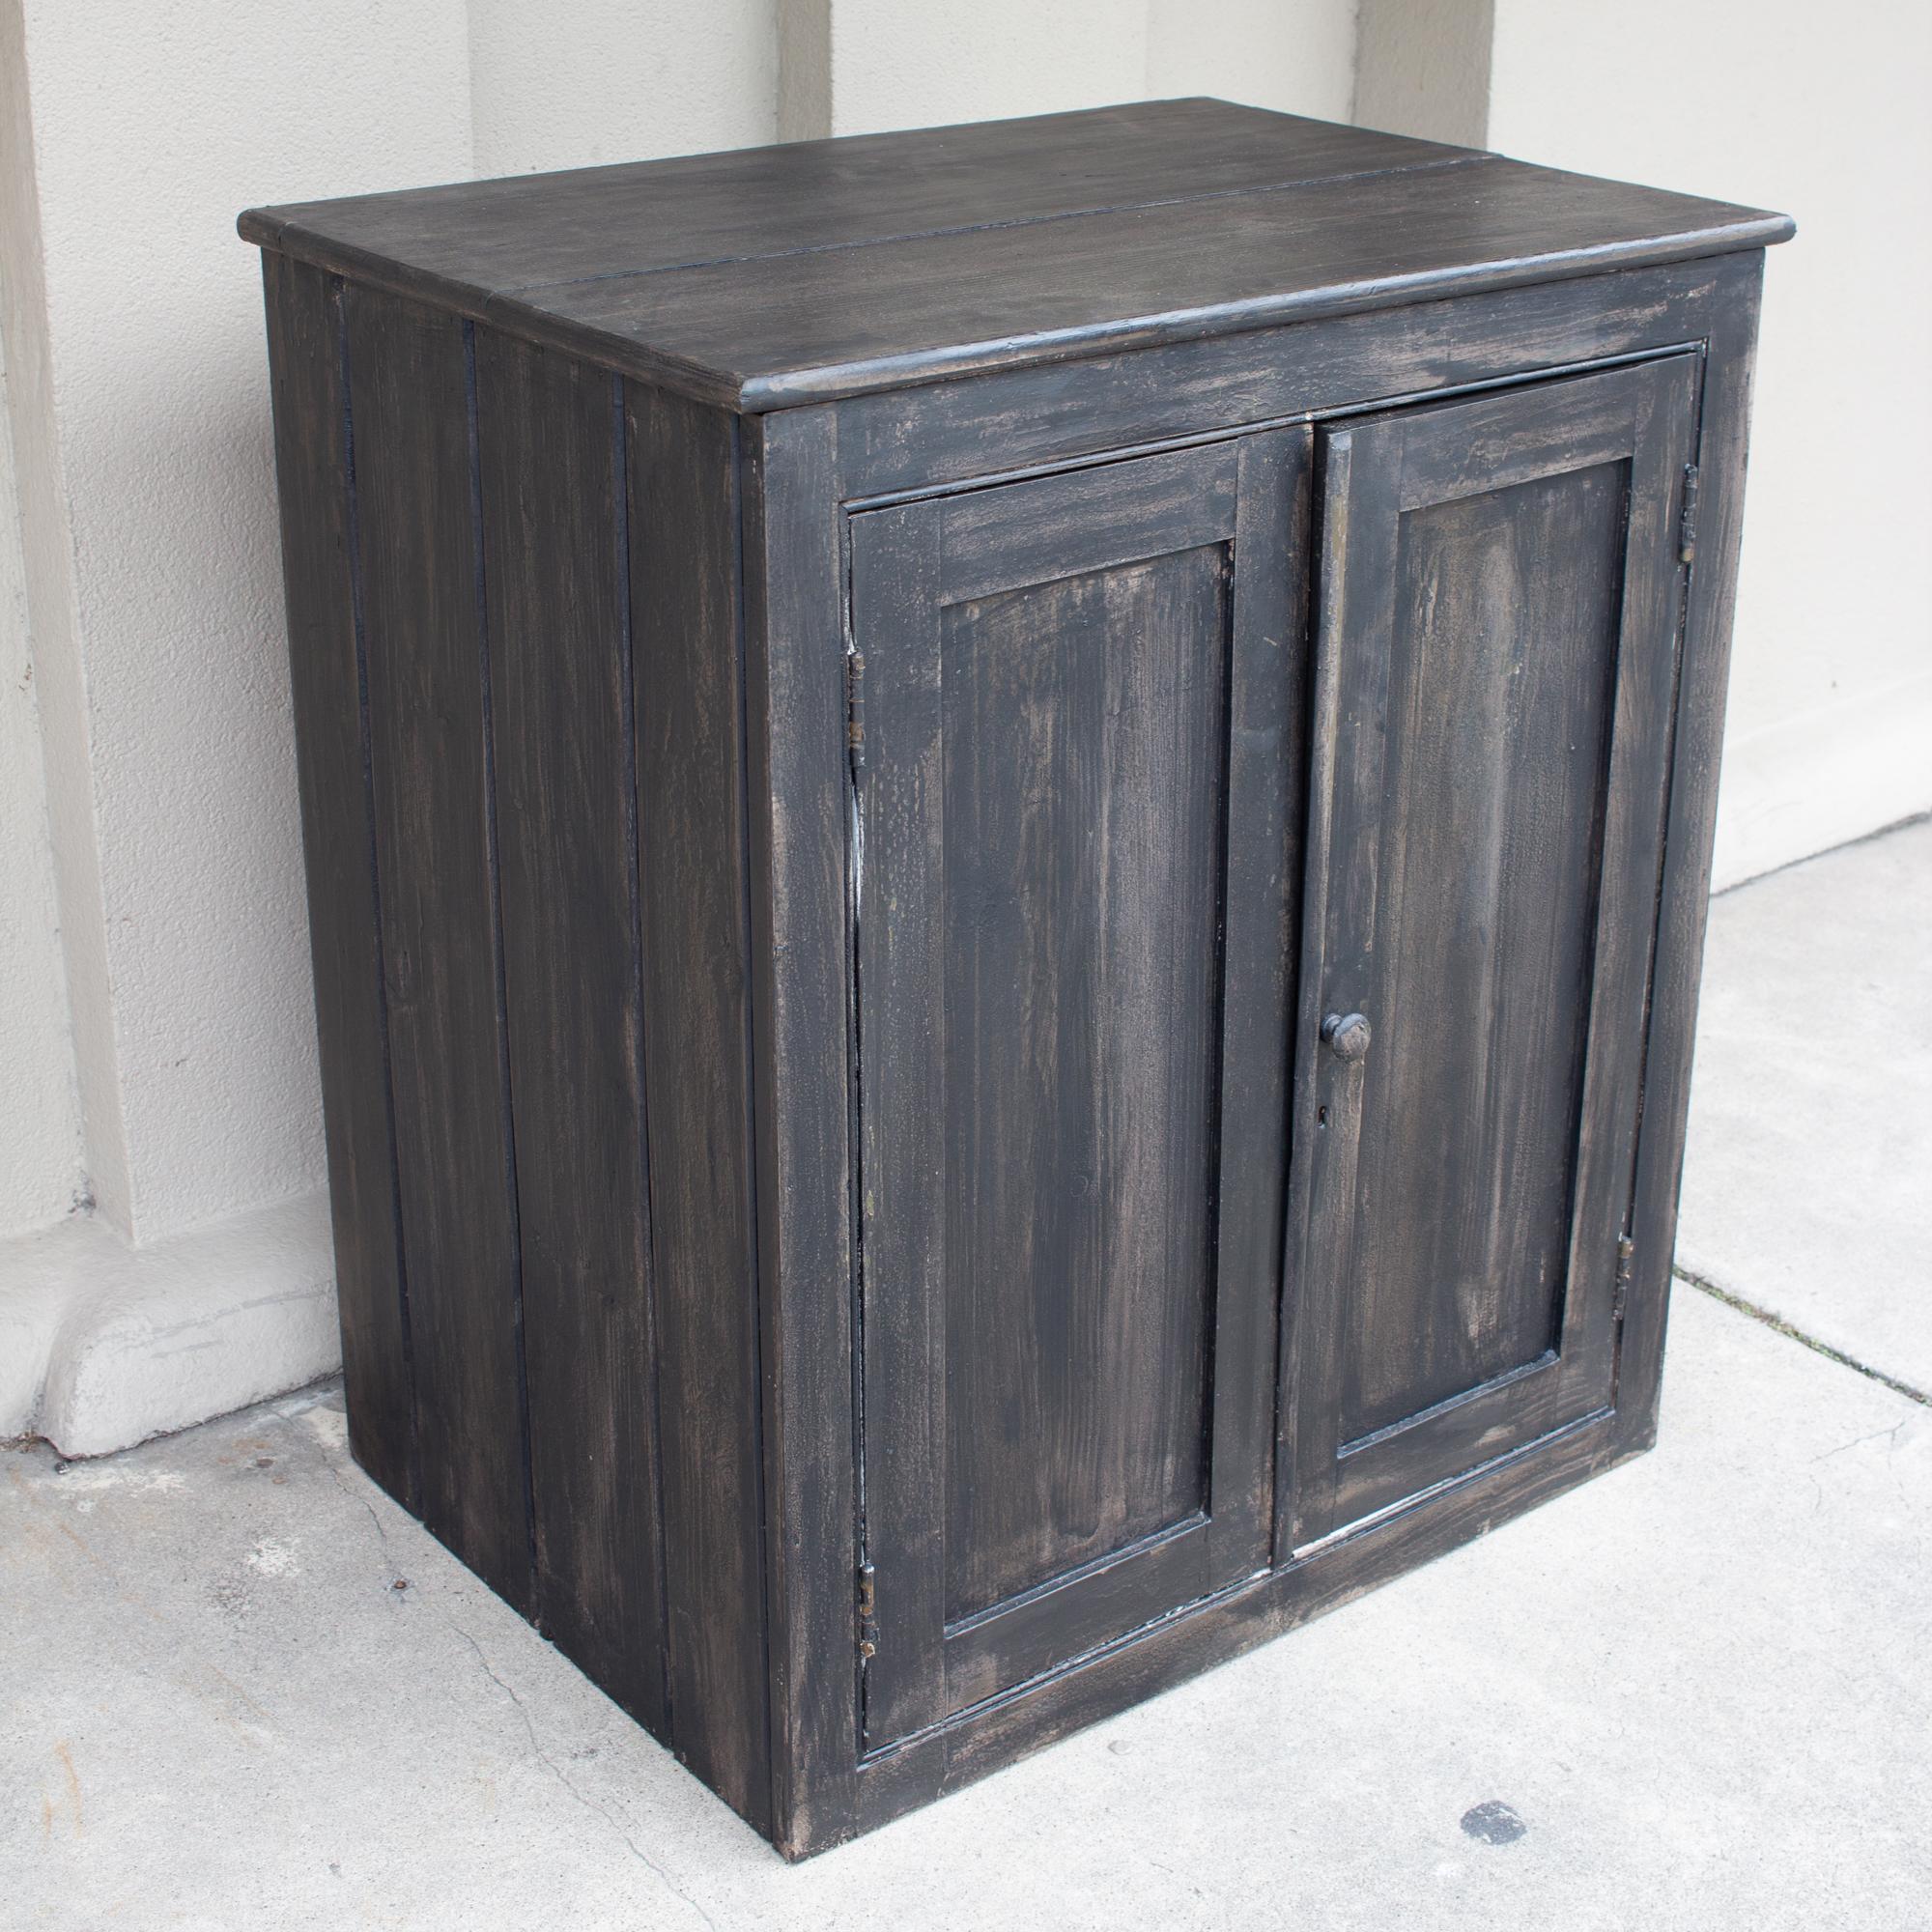 This vintage wooden cabinet features two front doors and an interior shelf with plenty of space for storage. The height is perfect to set this pieces up as a bar, or use for additional counter space as a small cabinet in a kitchen or pantry area.